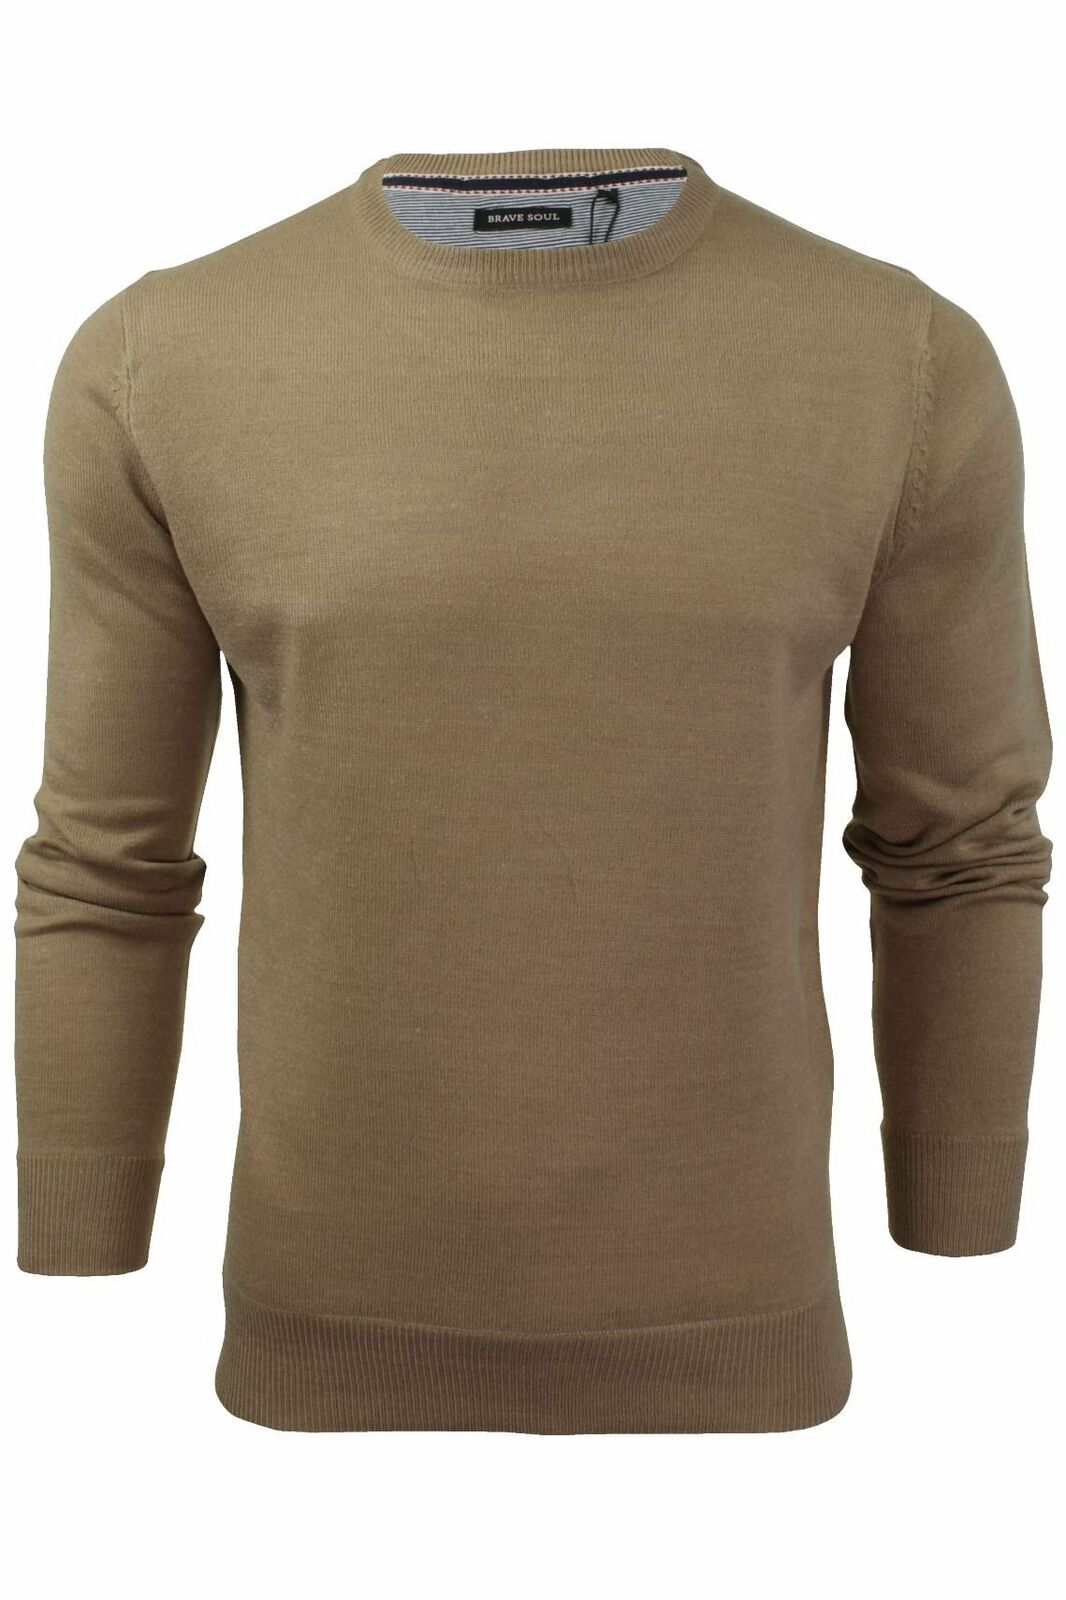 Mens Parsec Crew Neck Knitted Jumper Sweater Top S to 5XL By Brave Soul ...